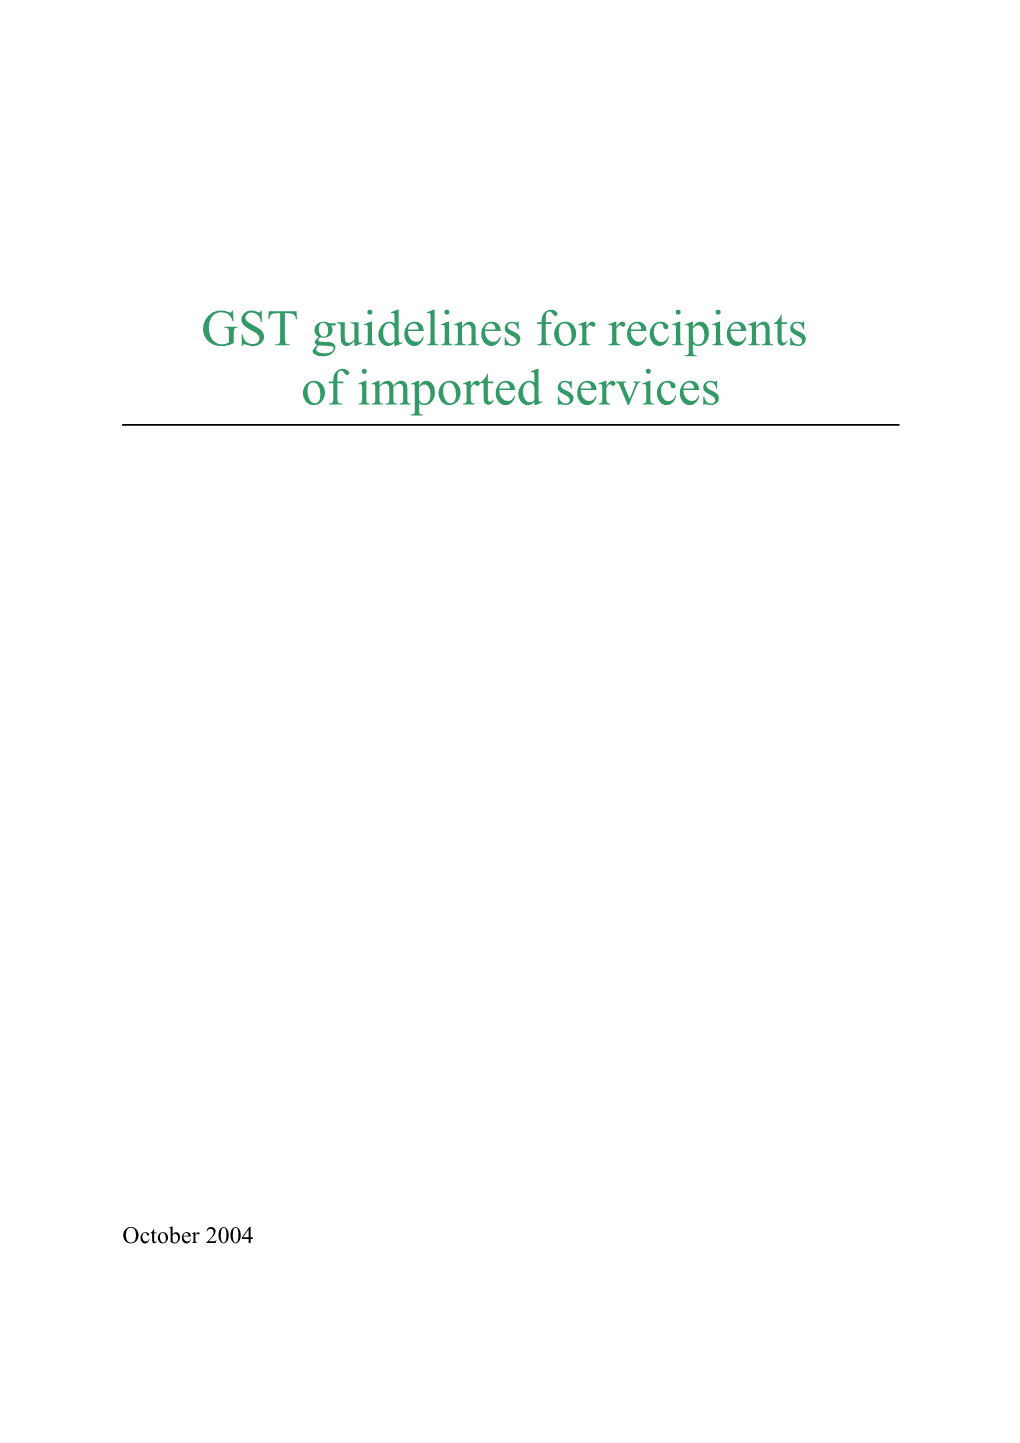 GST Guidelines for Recipients of Imported Services